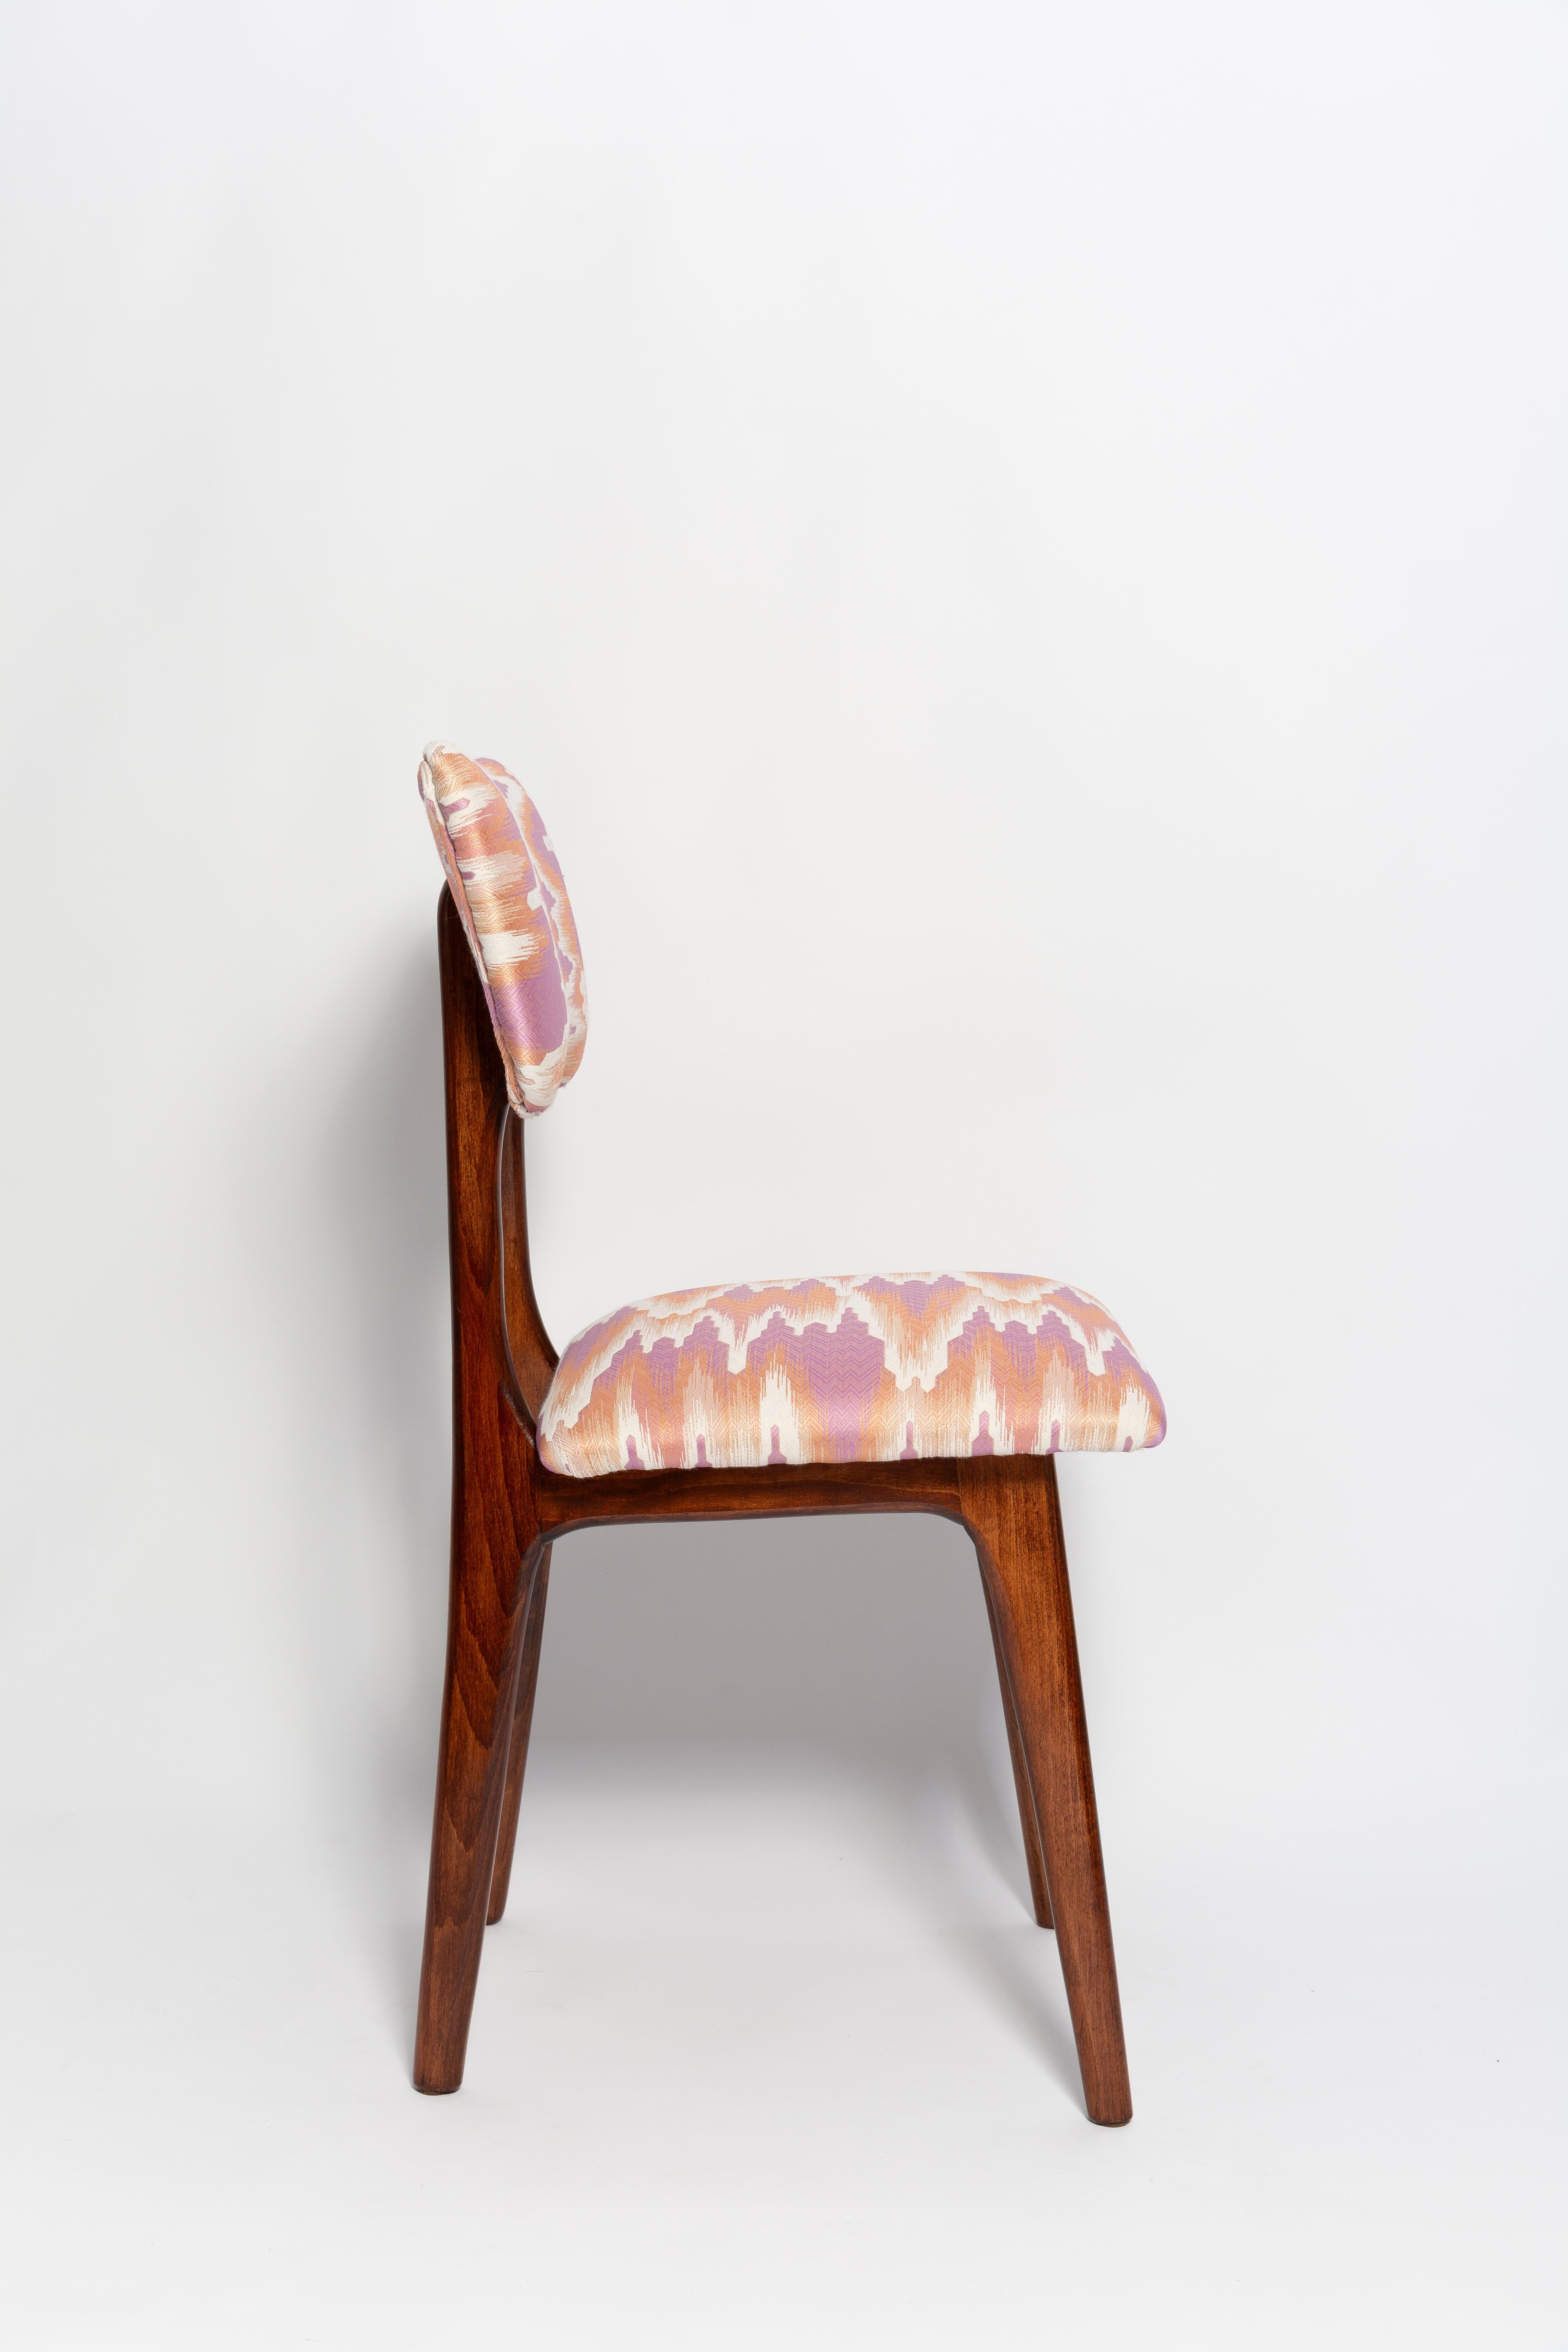 Eight Mid Century Butterfly Chairs, Fandango Jacquard, Dark Wood, Europe, 1960s In Excellent Condition For Sale In 05-080 Hornowek, PL